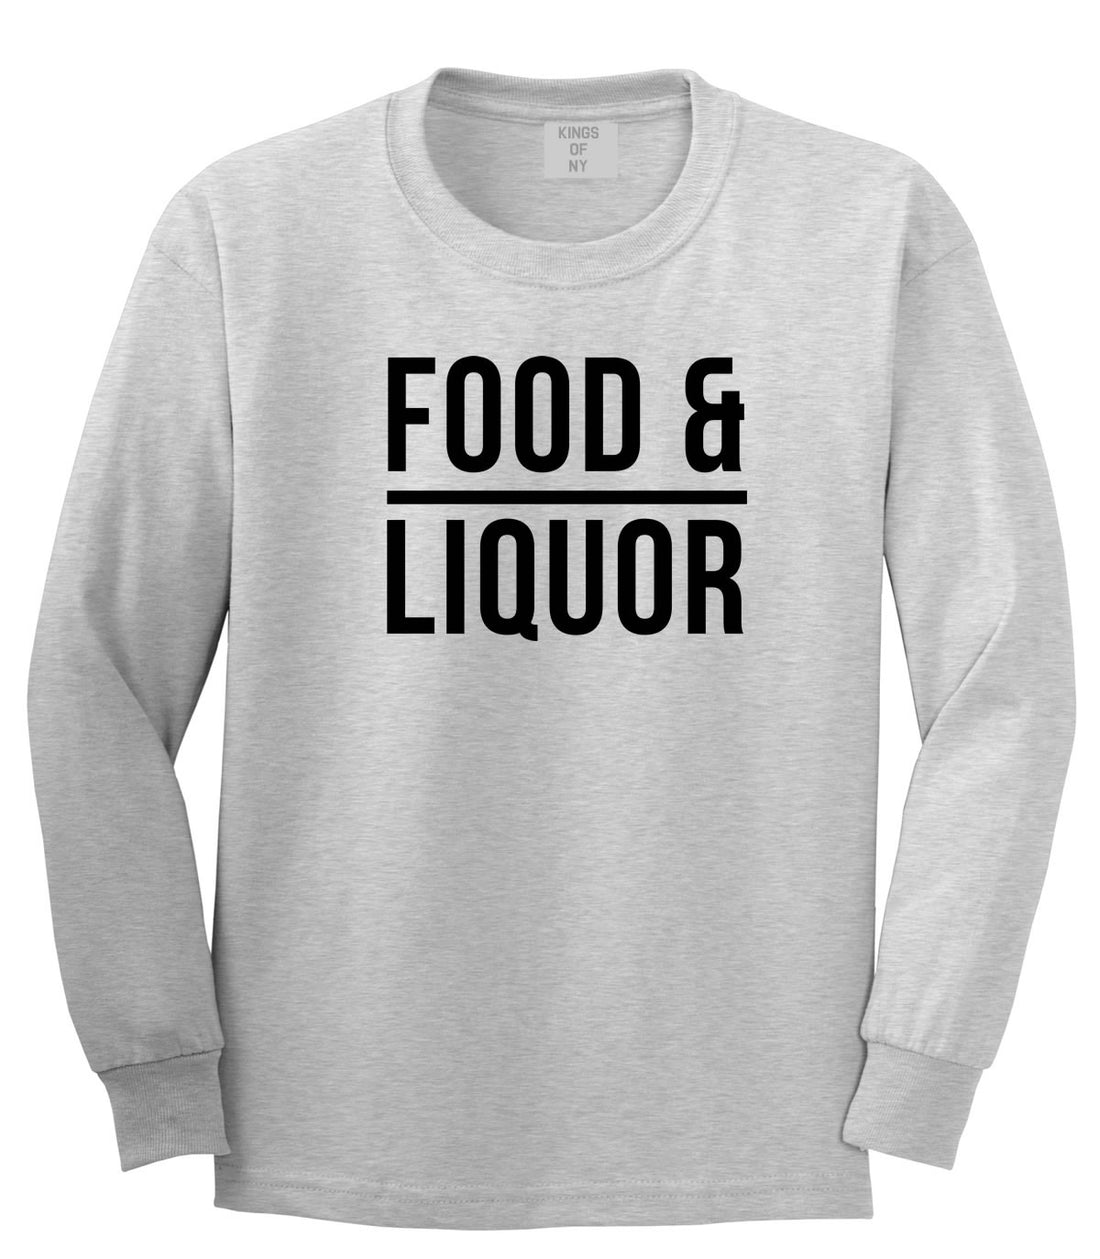 Food And Liquor Long Sleeve T-Shirt in Grey By Kings Of NY